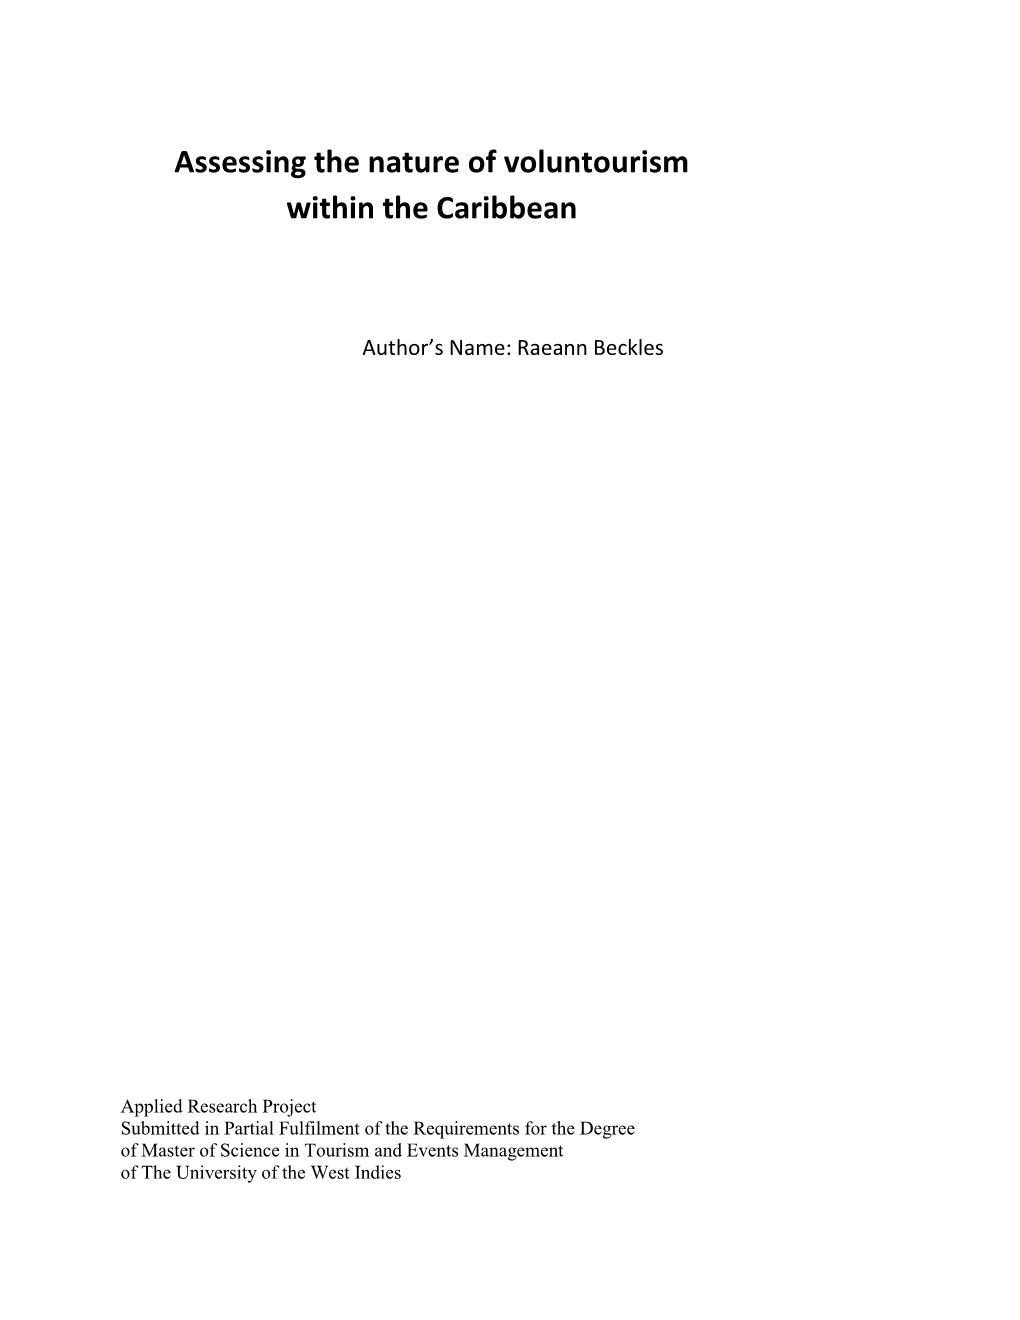 View”Assessing the Nature of Voluntourism Within the Caribbean”